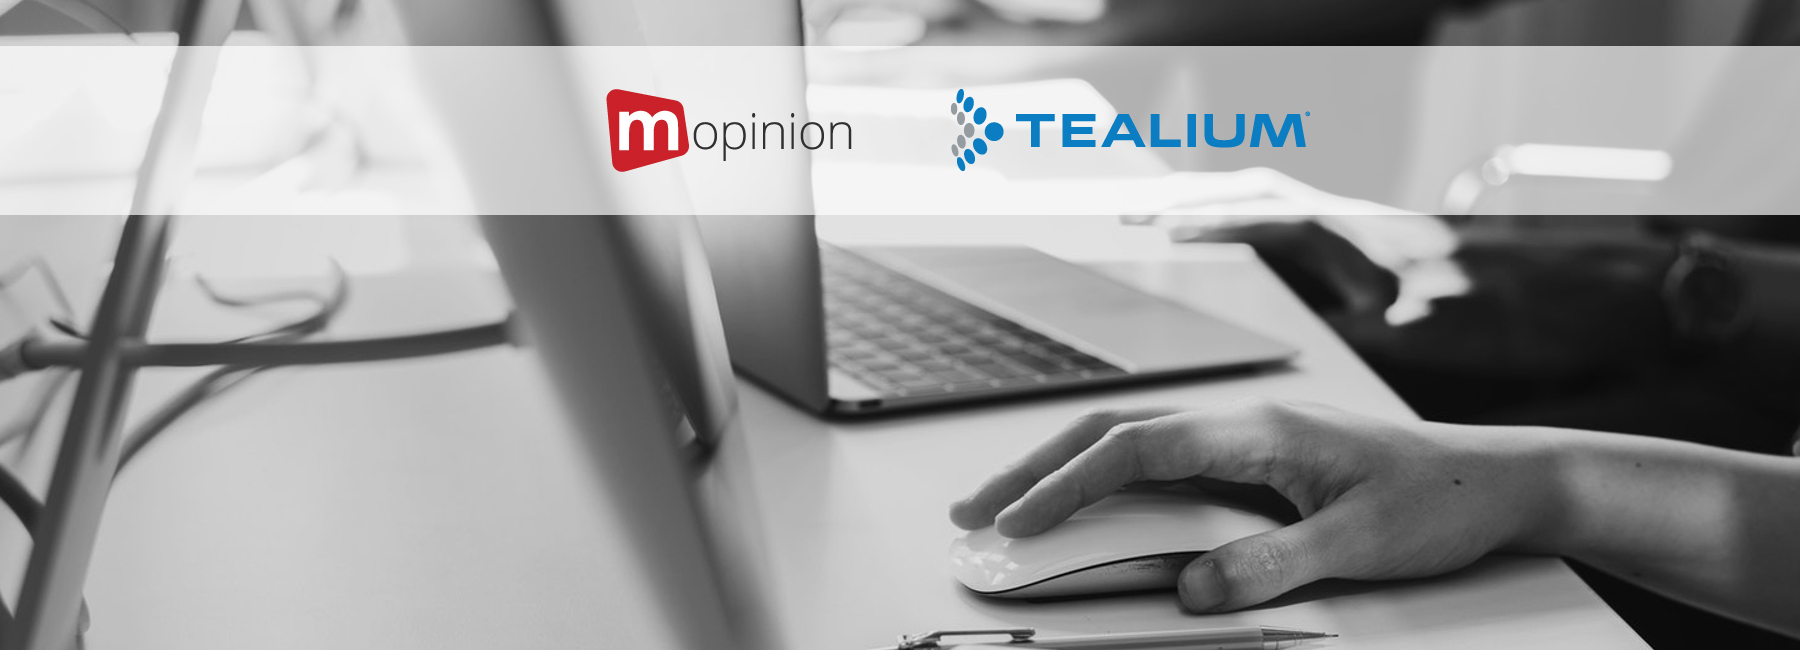 Tealium and Mopinion: the newest data power couple